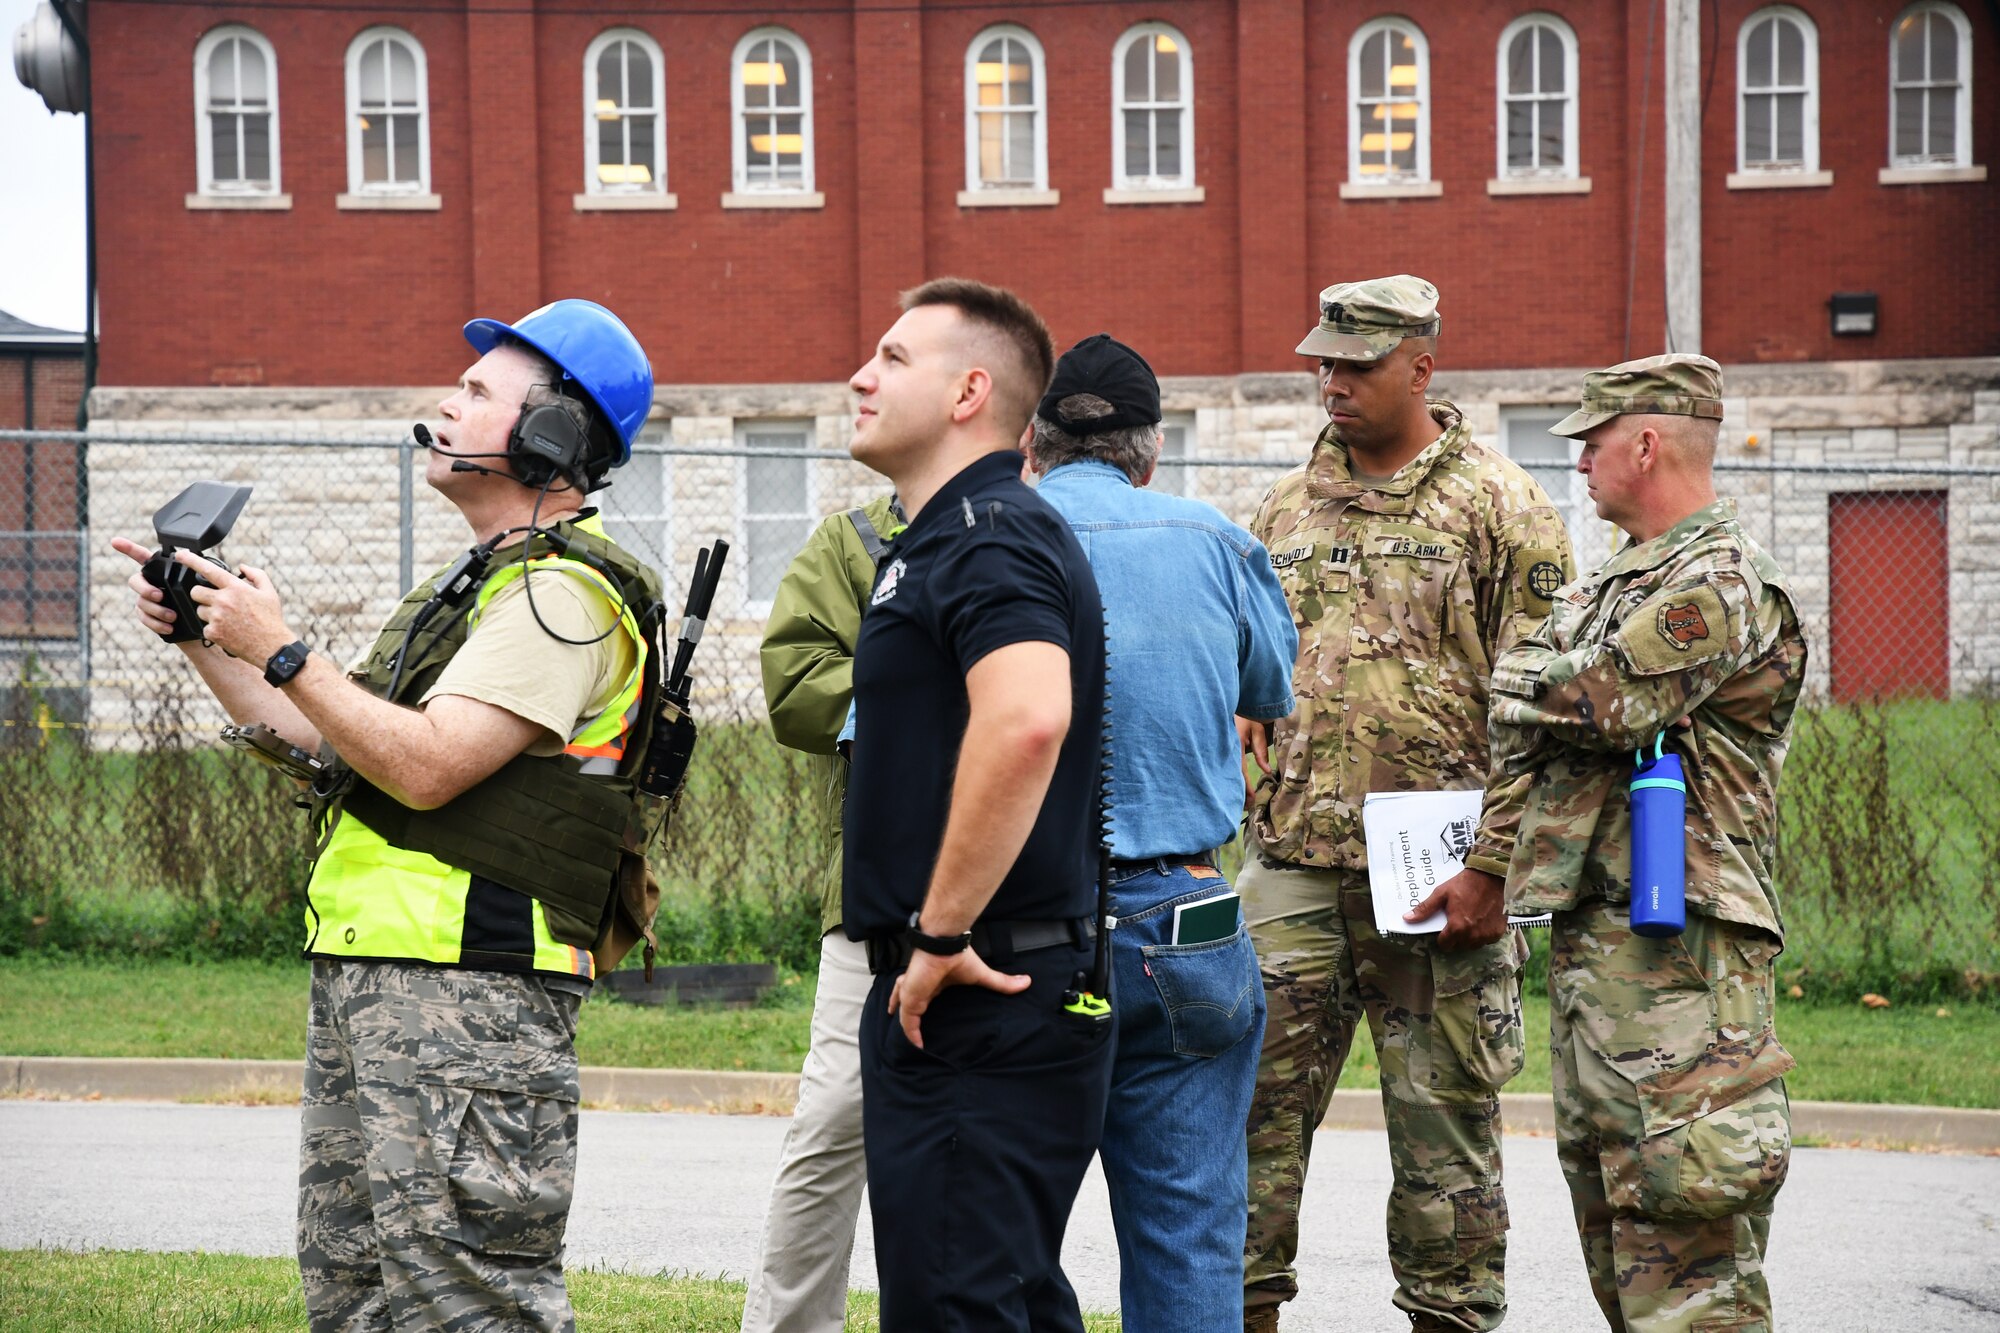 A Civil Air Patrol drone pilot captures aerial views of "damaged" buildings while other team members evaluate potential structural instability during an earthquake exercise involving the Missouri Air National Guard and state and local partners in St. Louis Oct. 2, 2021.